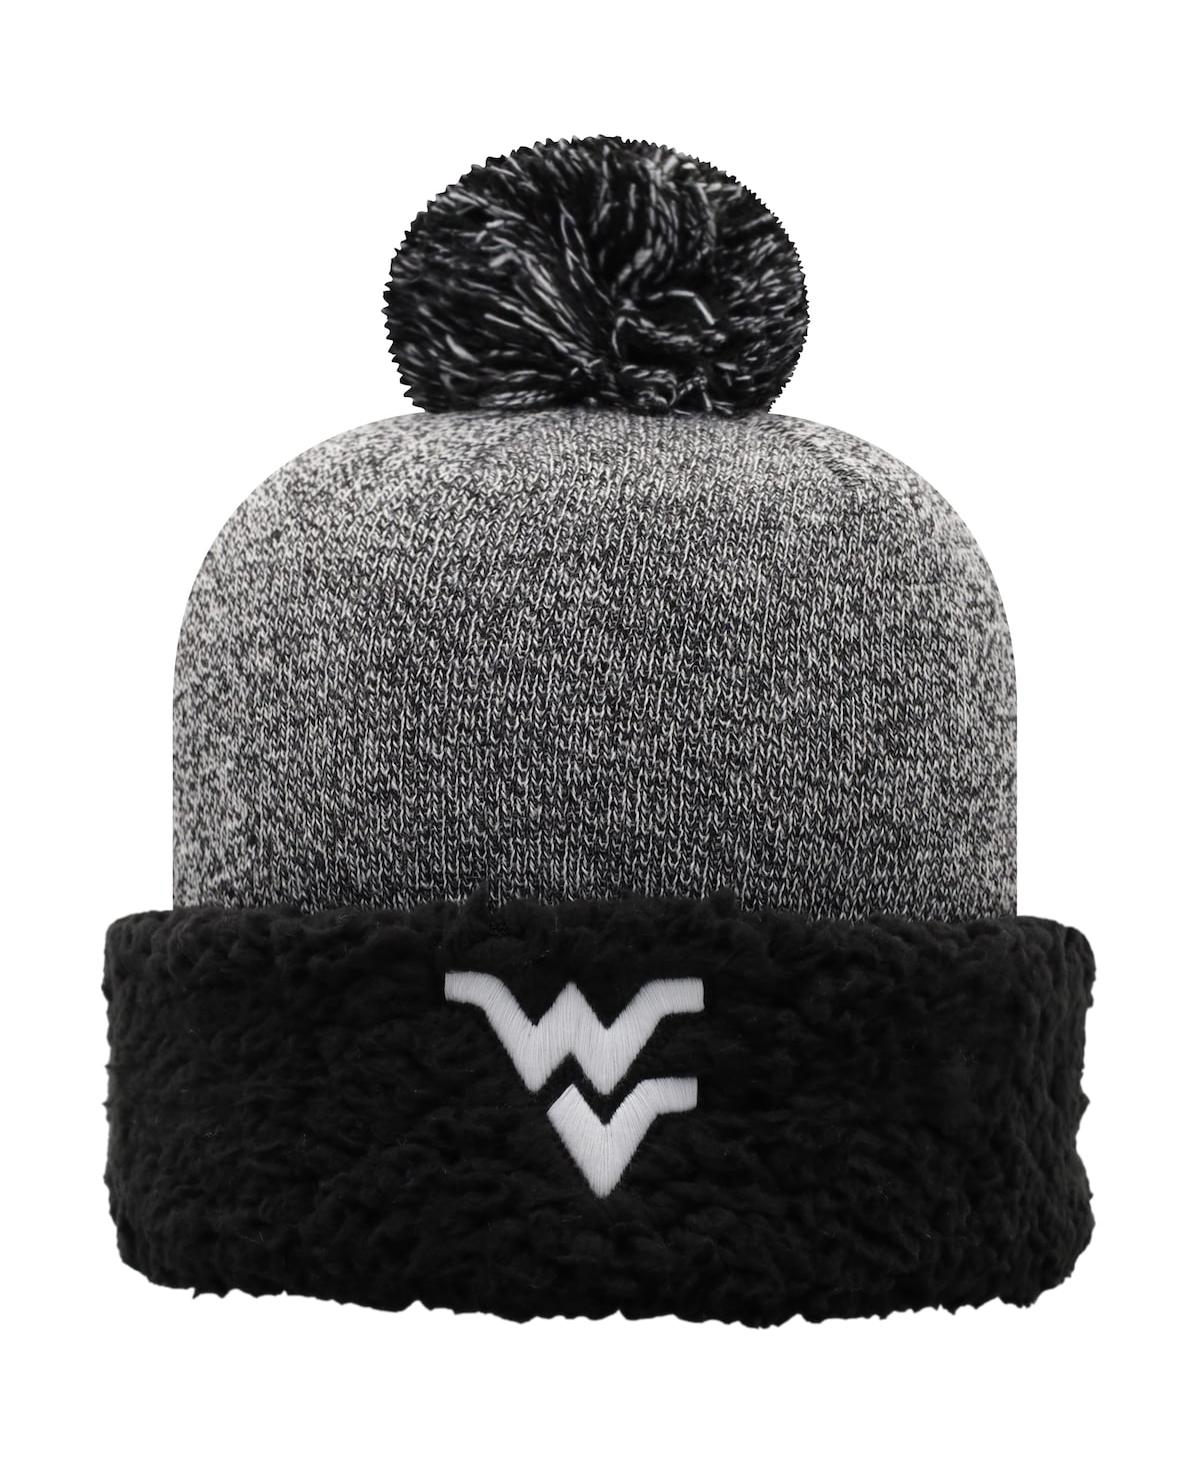 Women's Top of The World Black West Virginia Mountaineers Snug Cuffed Knit Hat with Pom - Black